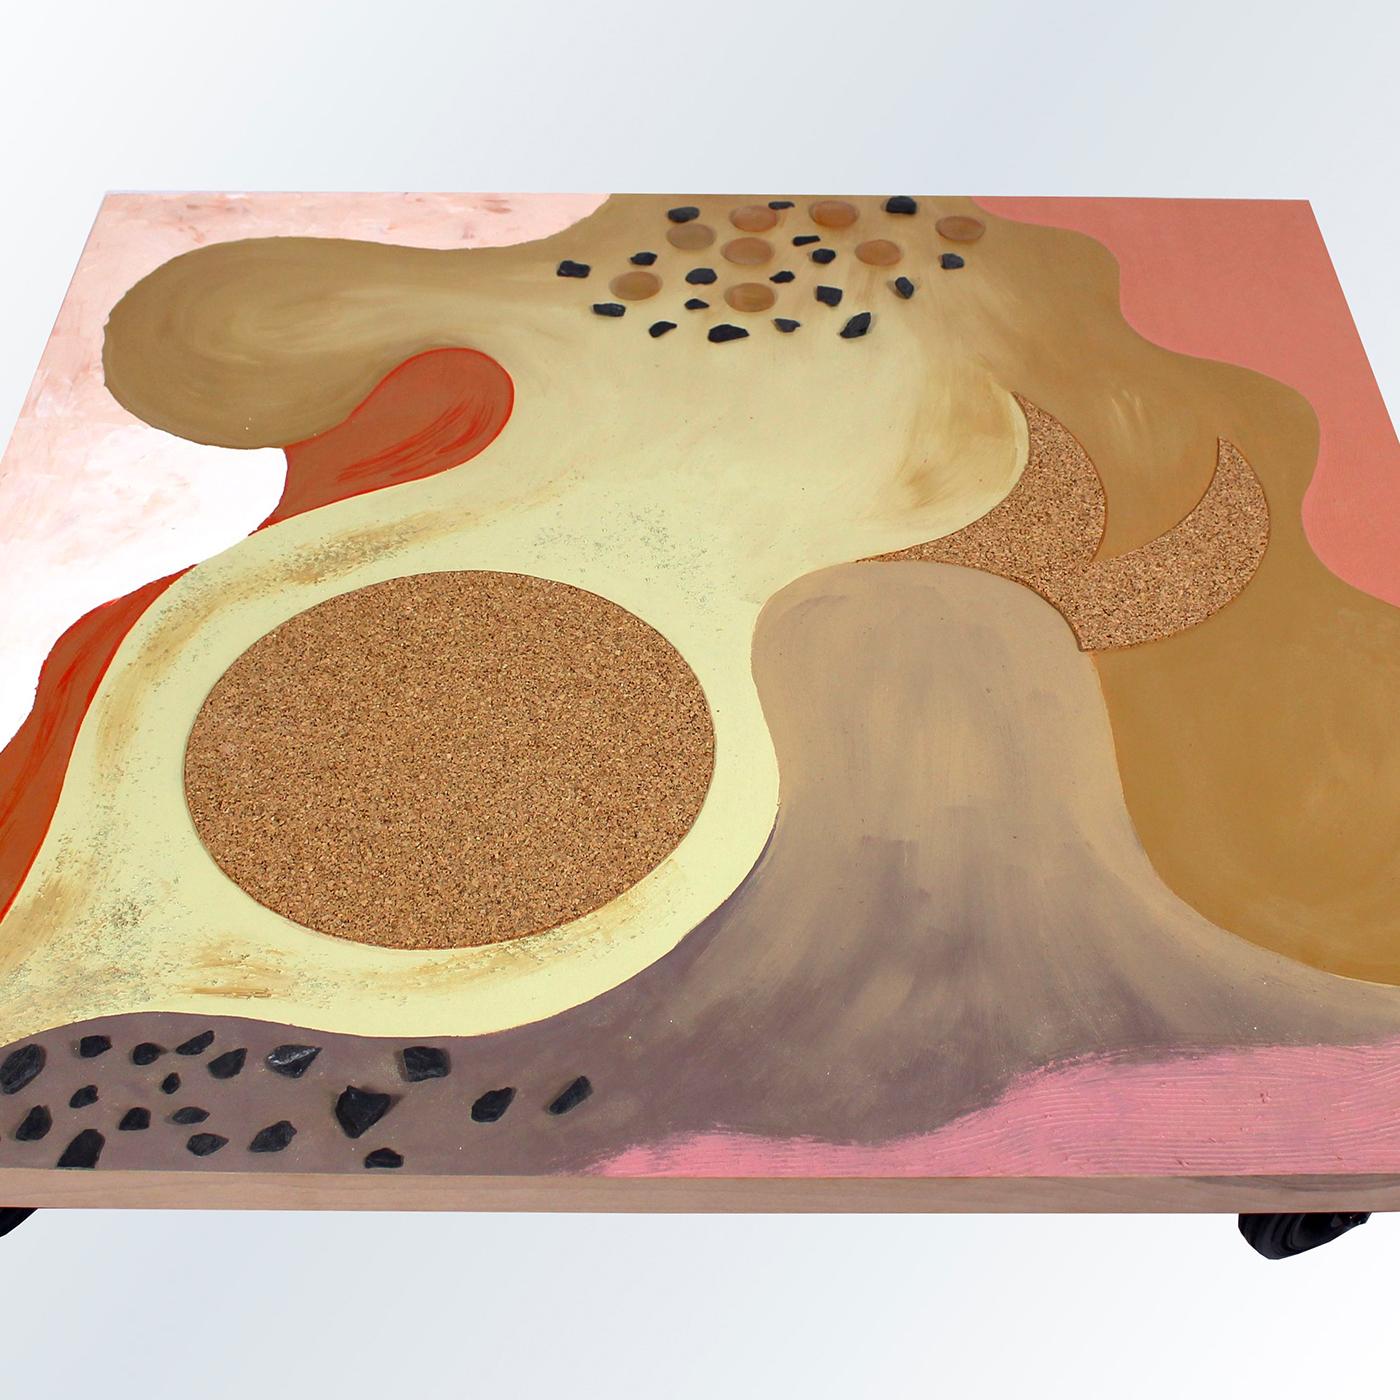 Contemporary and unique, this coffee table elevates functional decor to art with the abstract 